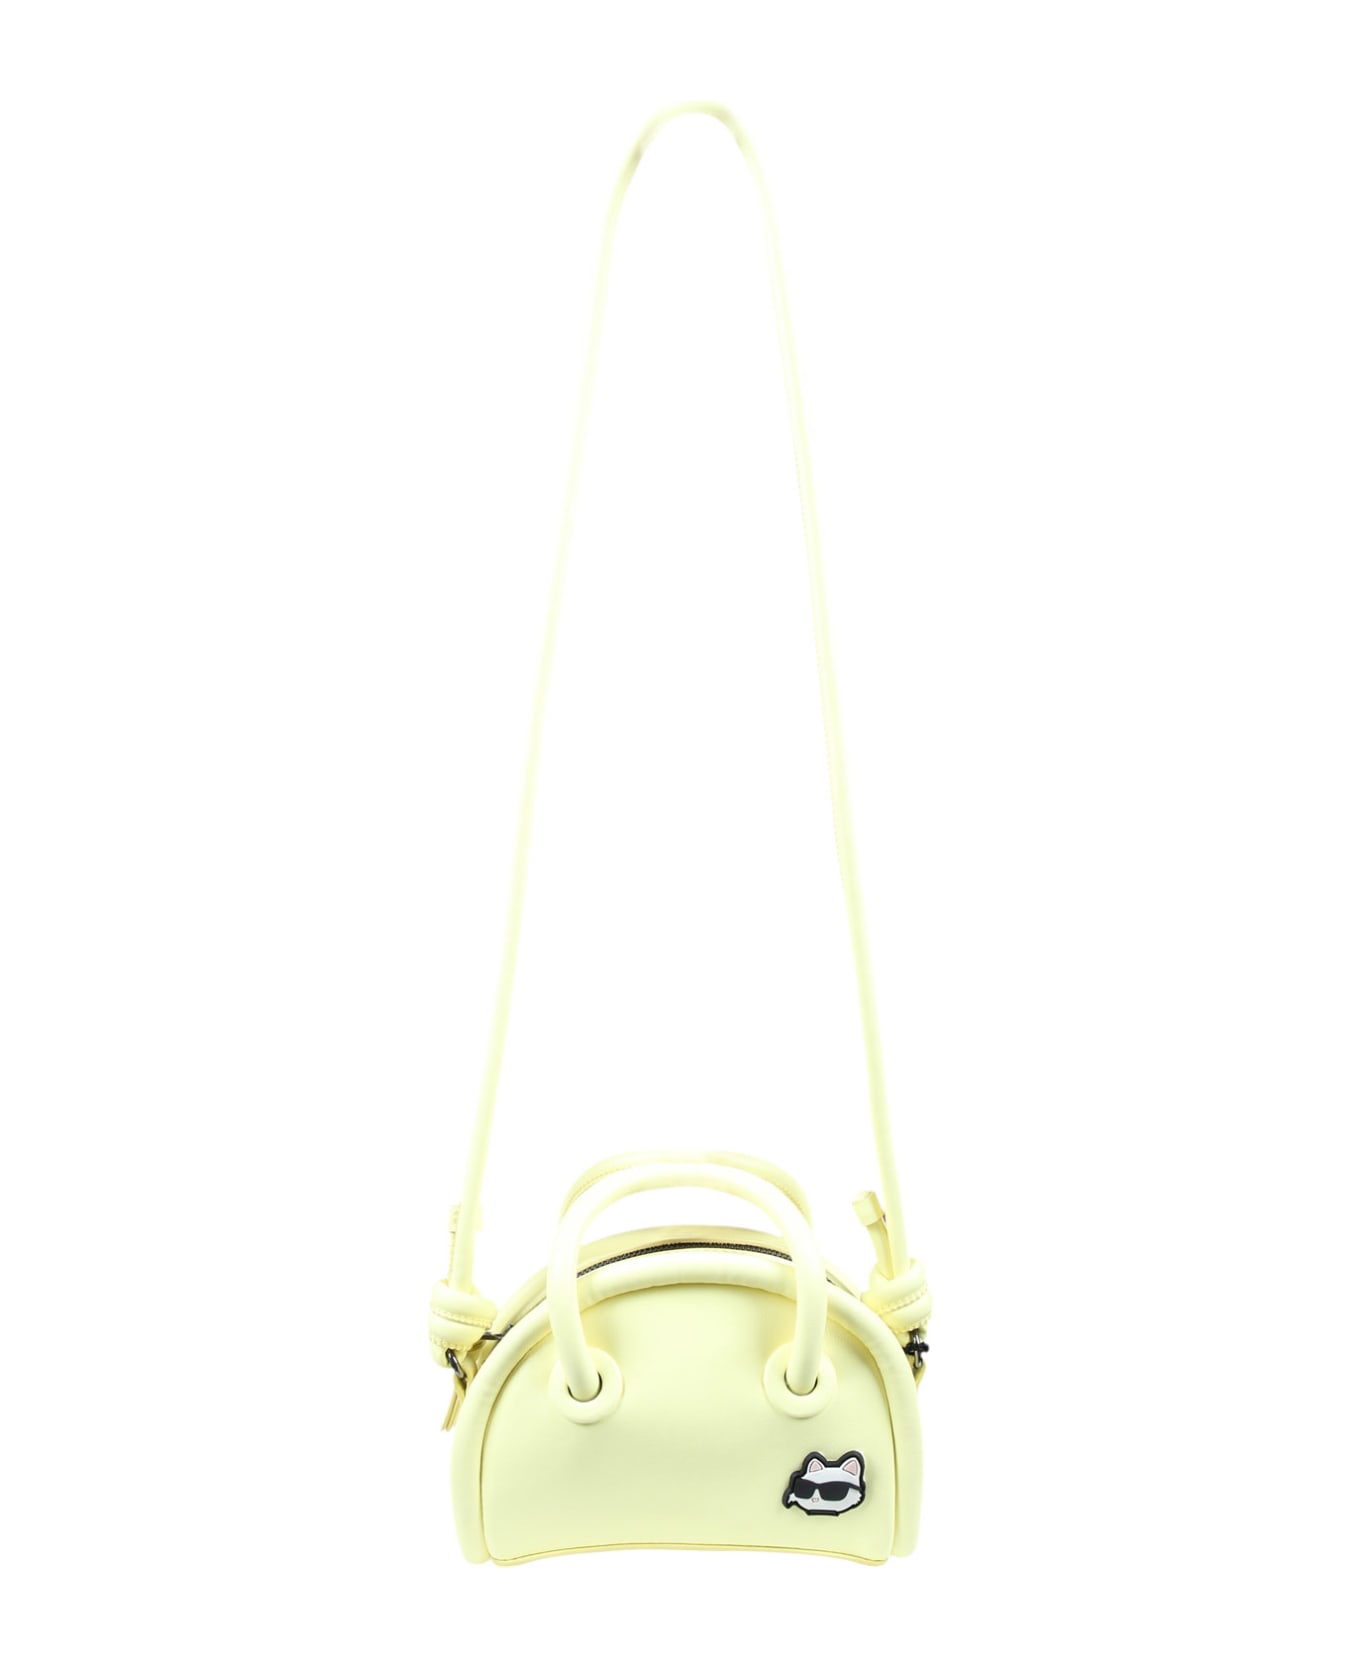 Karl Lagerfeld Kids Yellow Casual Bag For Girl With Logo - Yellow